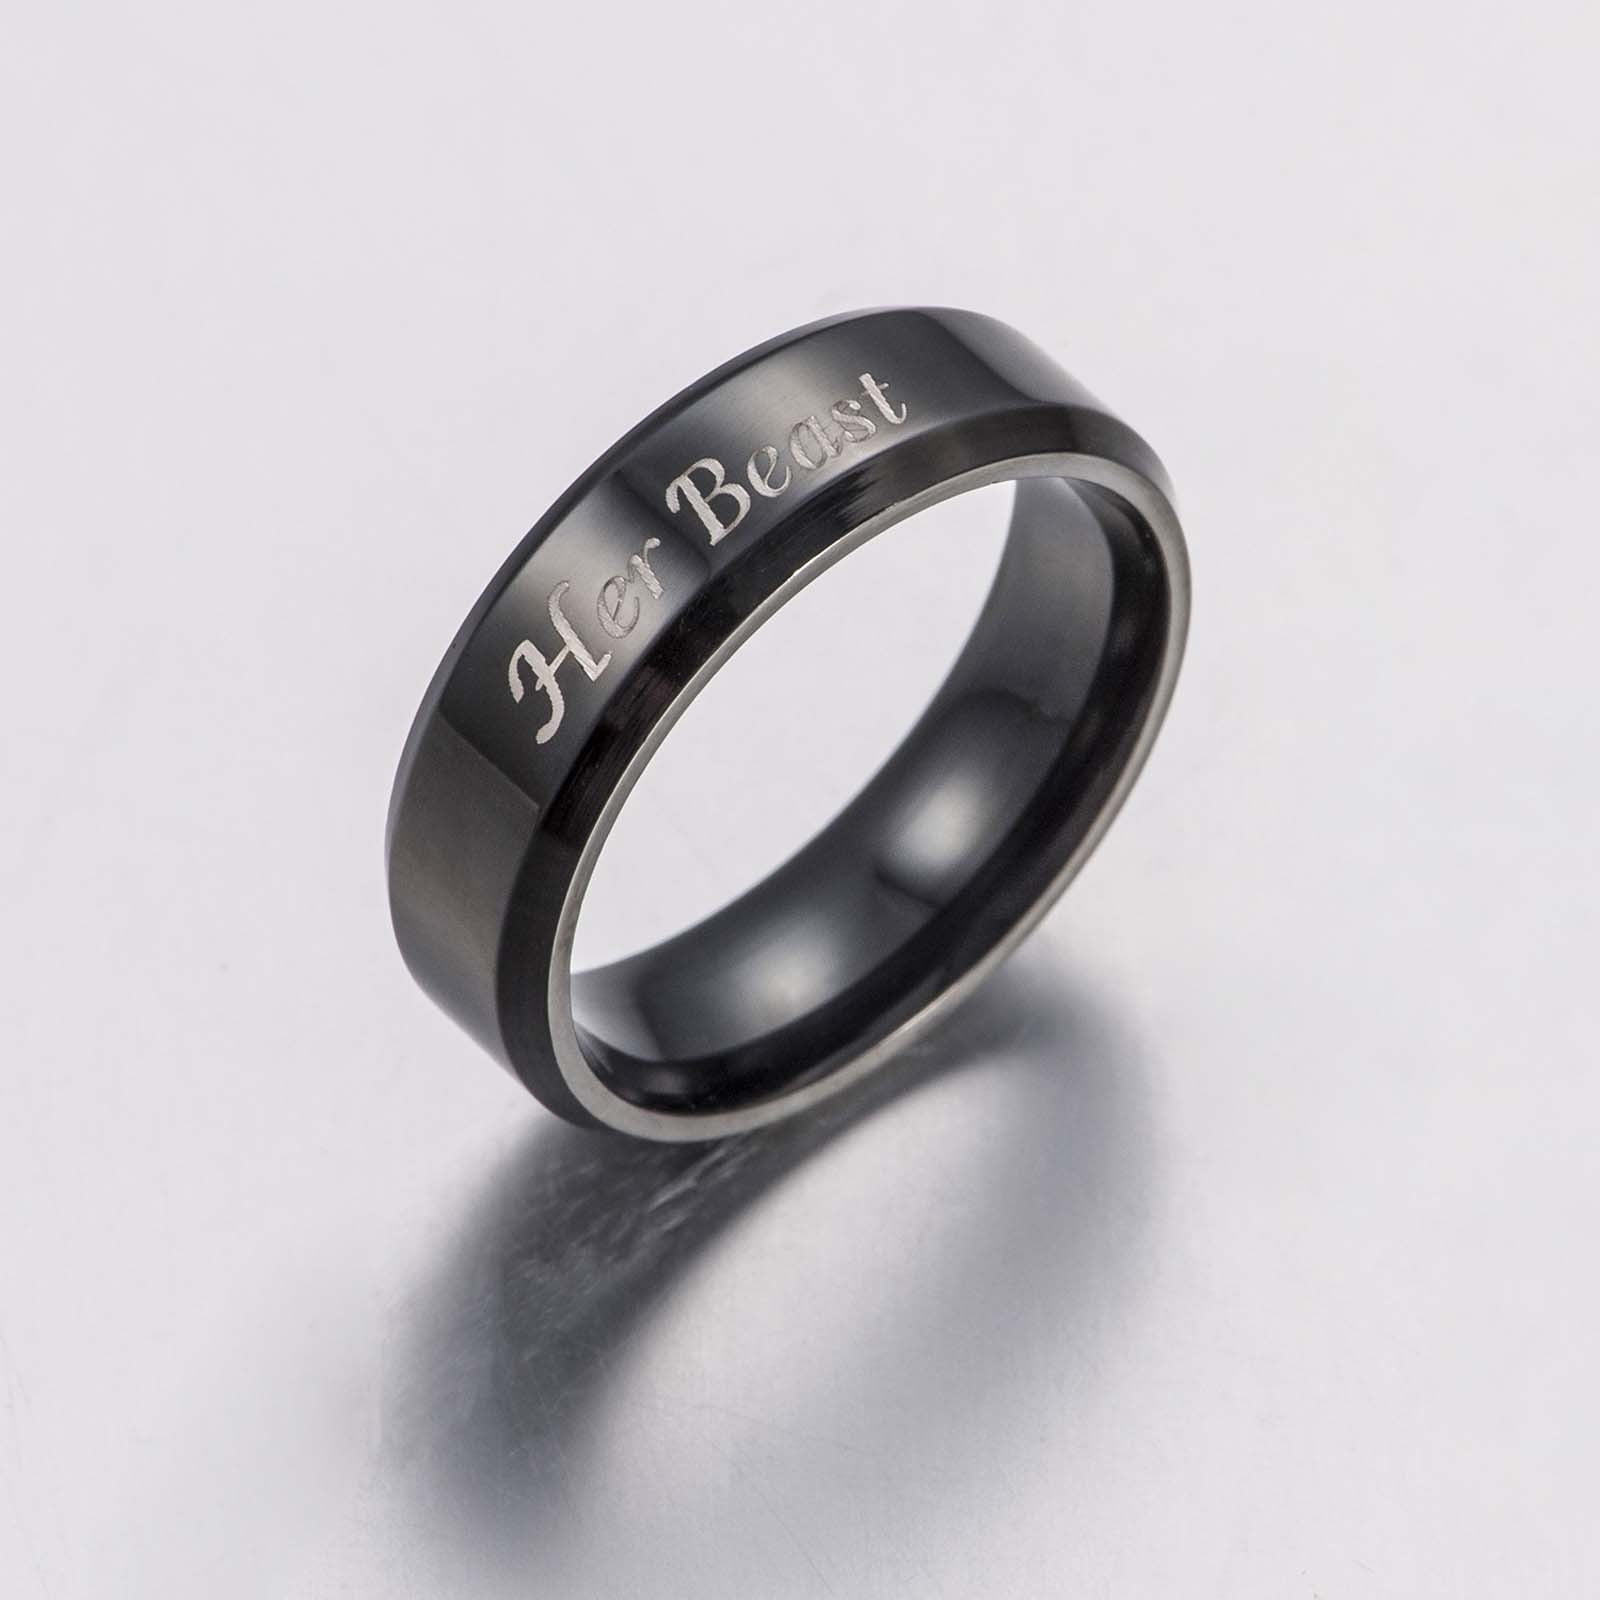 Her Beast Steel titanium Couple Rings His and Her Promise Wedding Band Rings